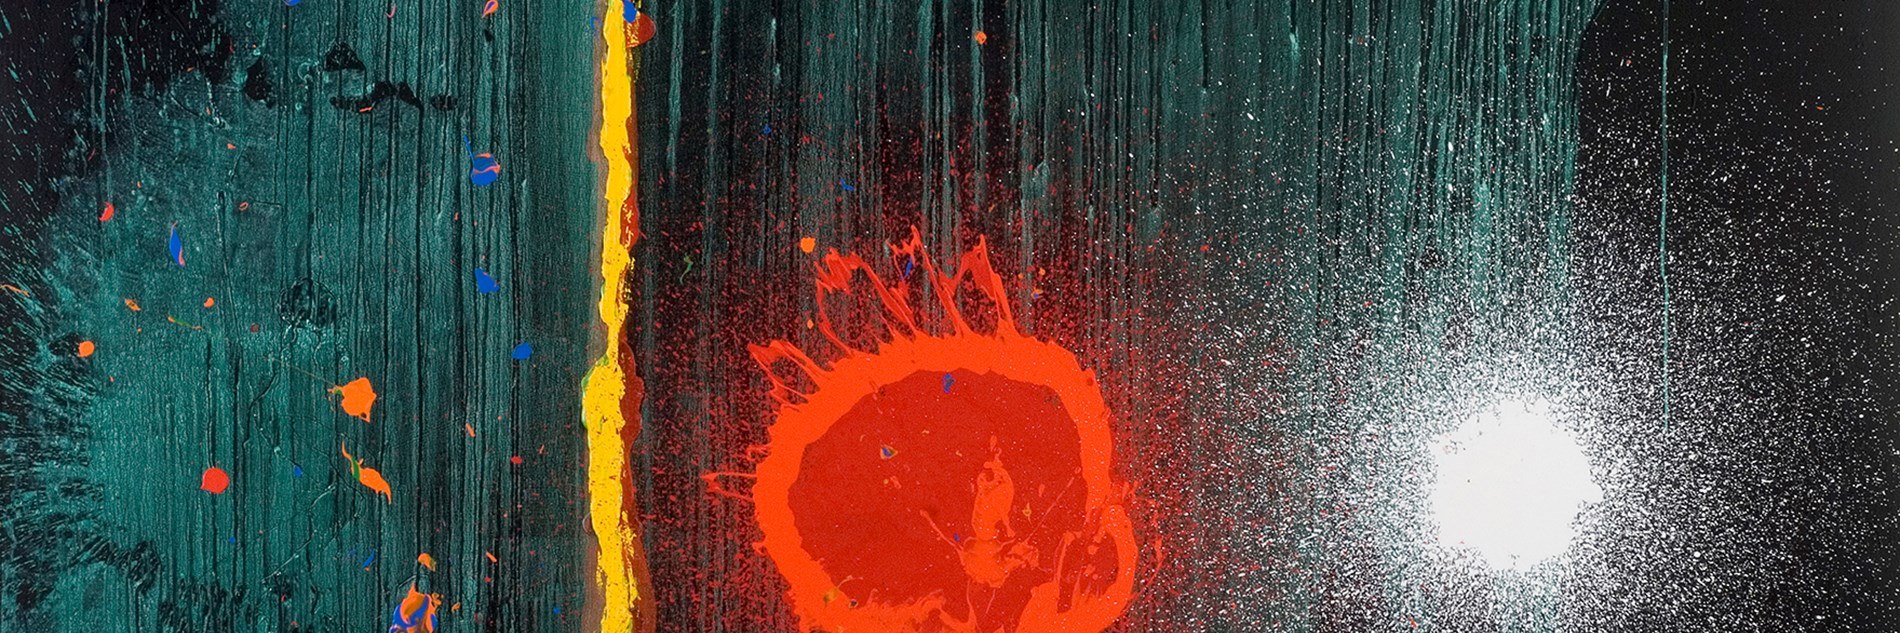 A vivid abstract painting in acrylic featuring a bright circular orange/red motif and a fiery vertical yellow streak on a turquoise and navy background.